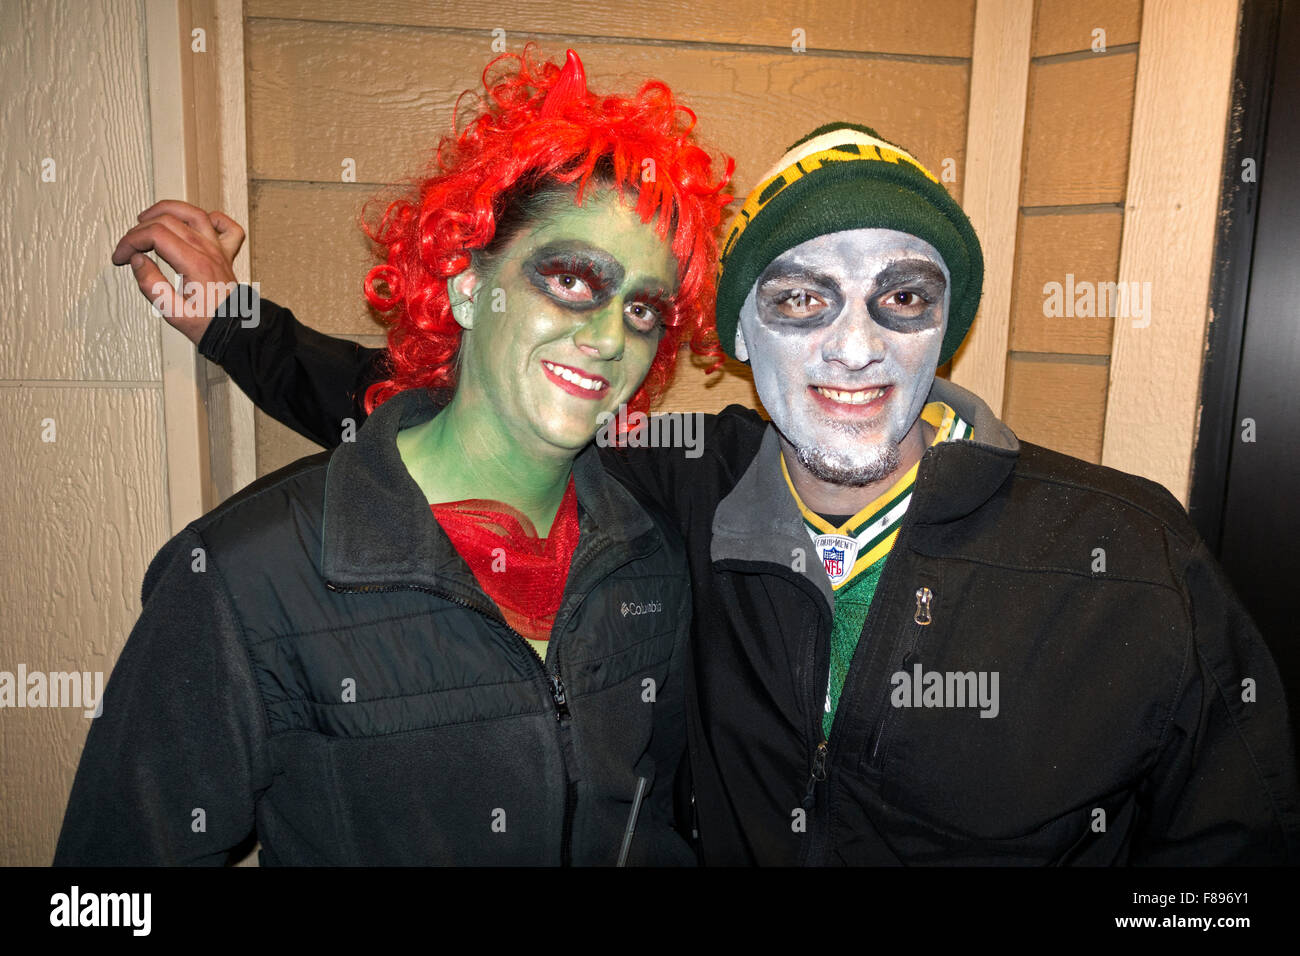 Halloween en maraude couple wearing Greenbay Football Packer & possible cheer conduisant les costumes. Cumberland Wisconsin WI USA Banque D'Images